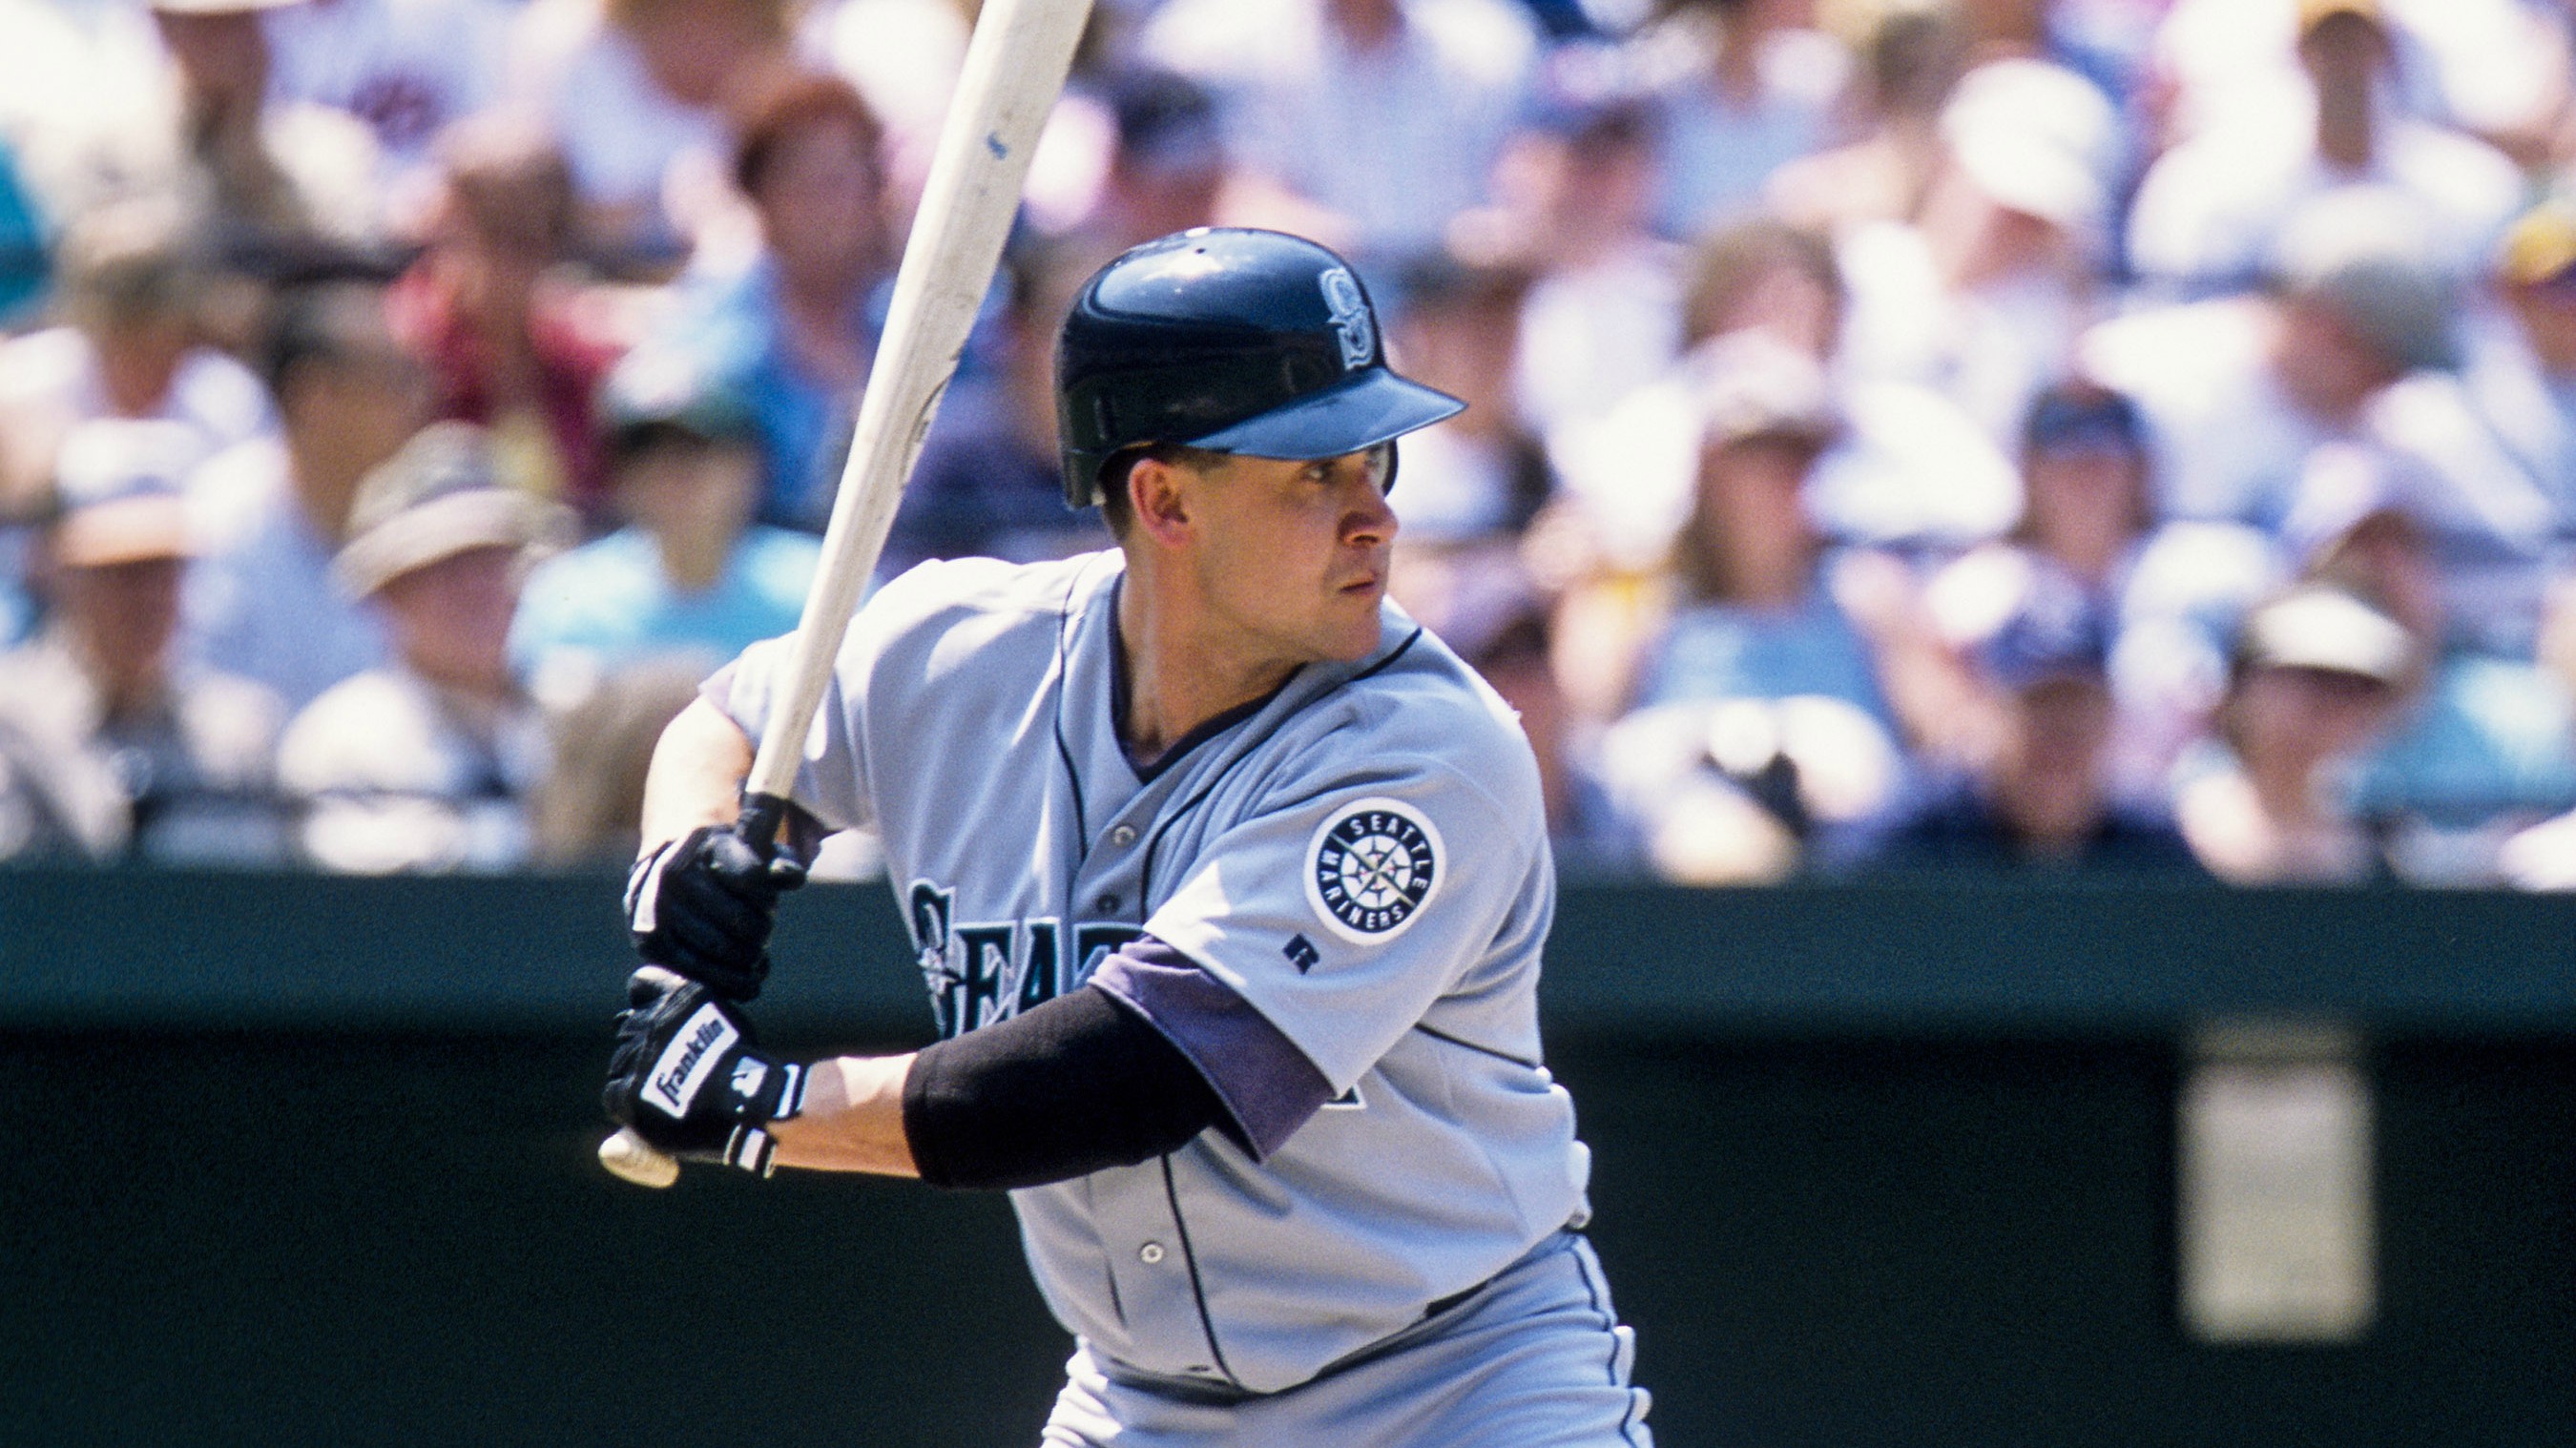 SEATTLE (AP) — Bret Boone gave the Seattle Mariners a lift again.